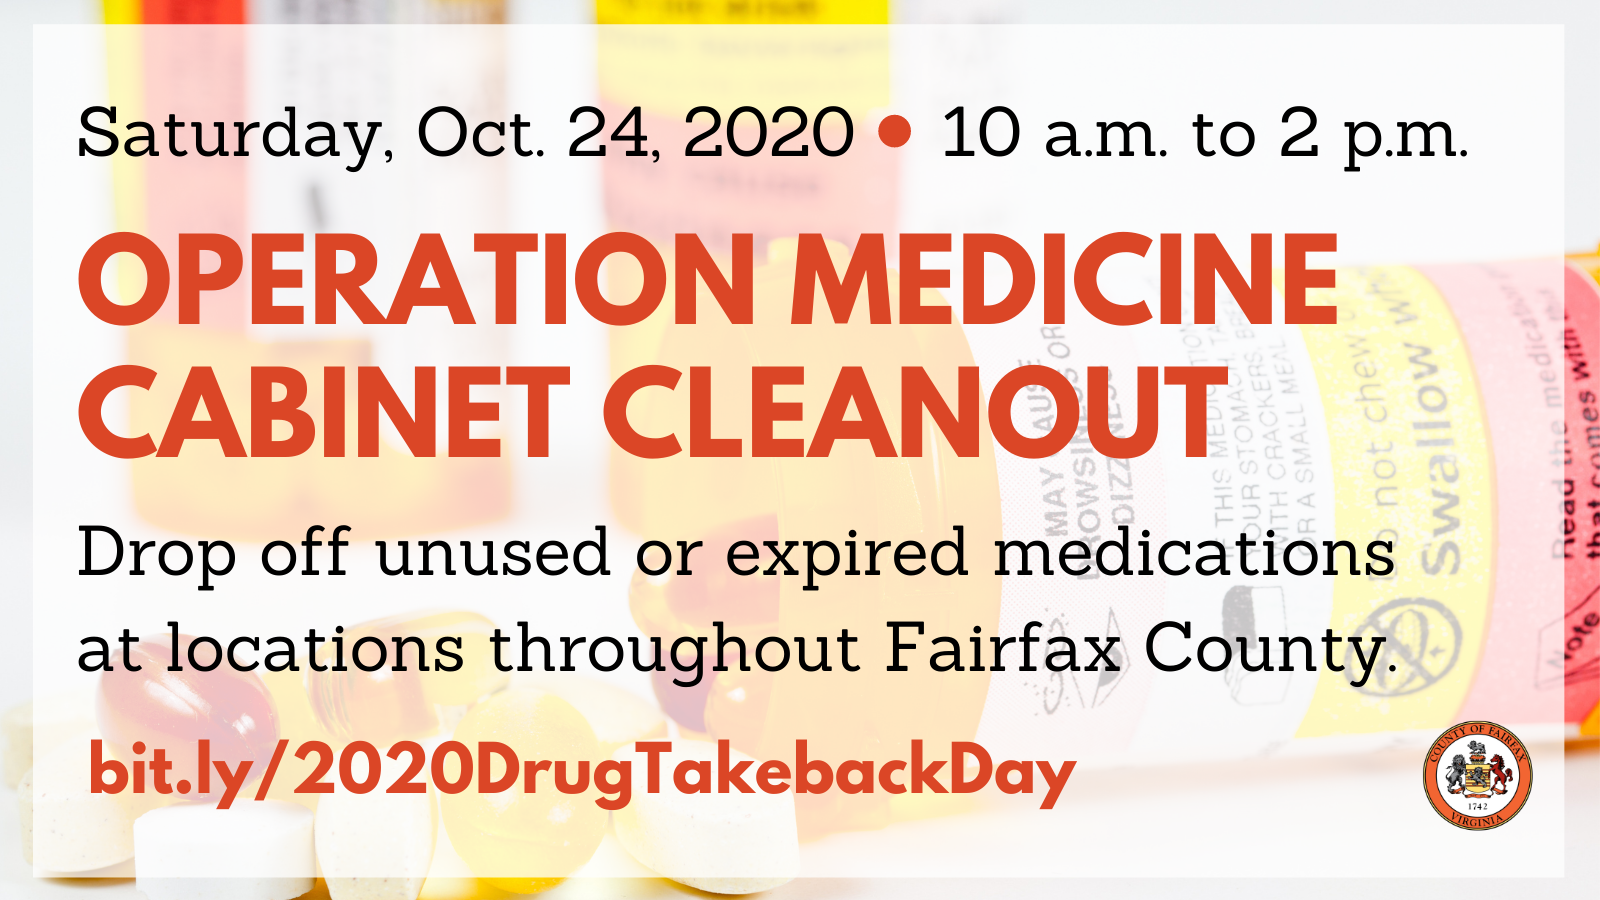 Operation Medicine Cabinet Cleanout graphic for Twitter